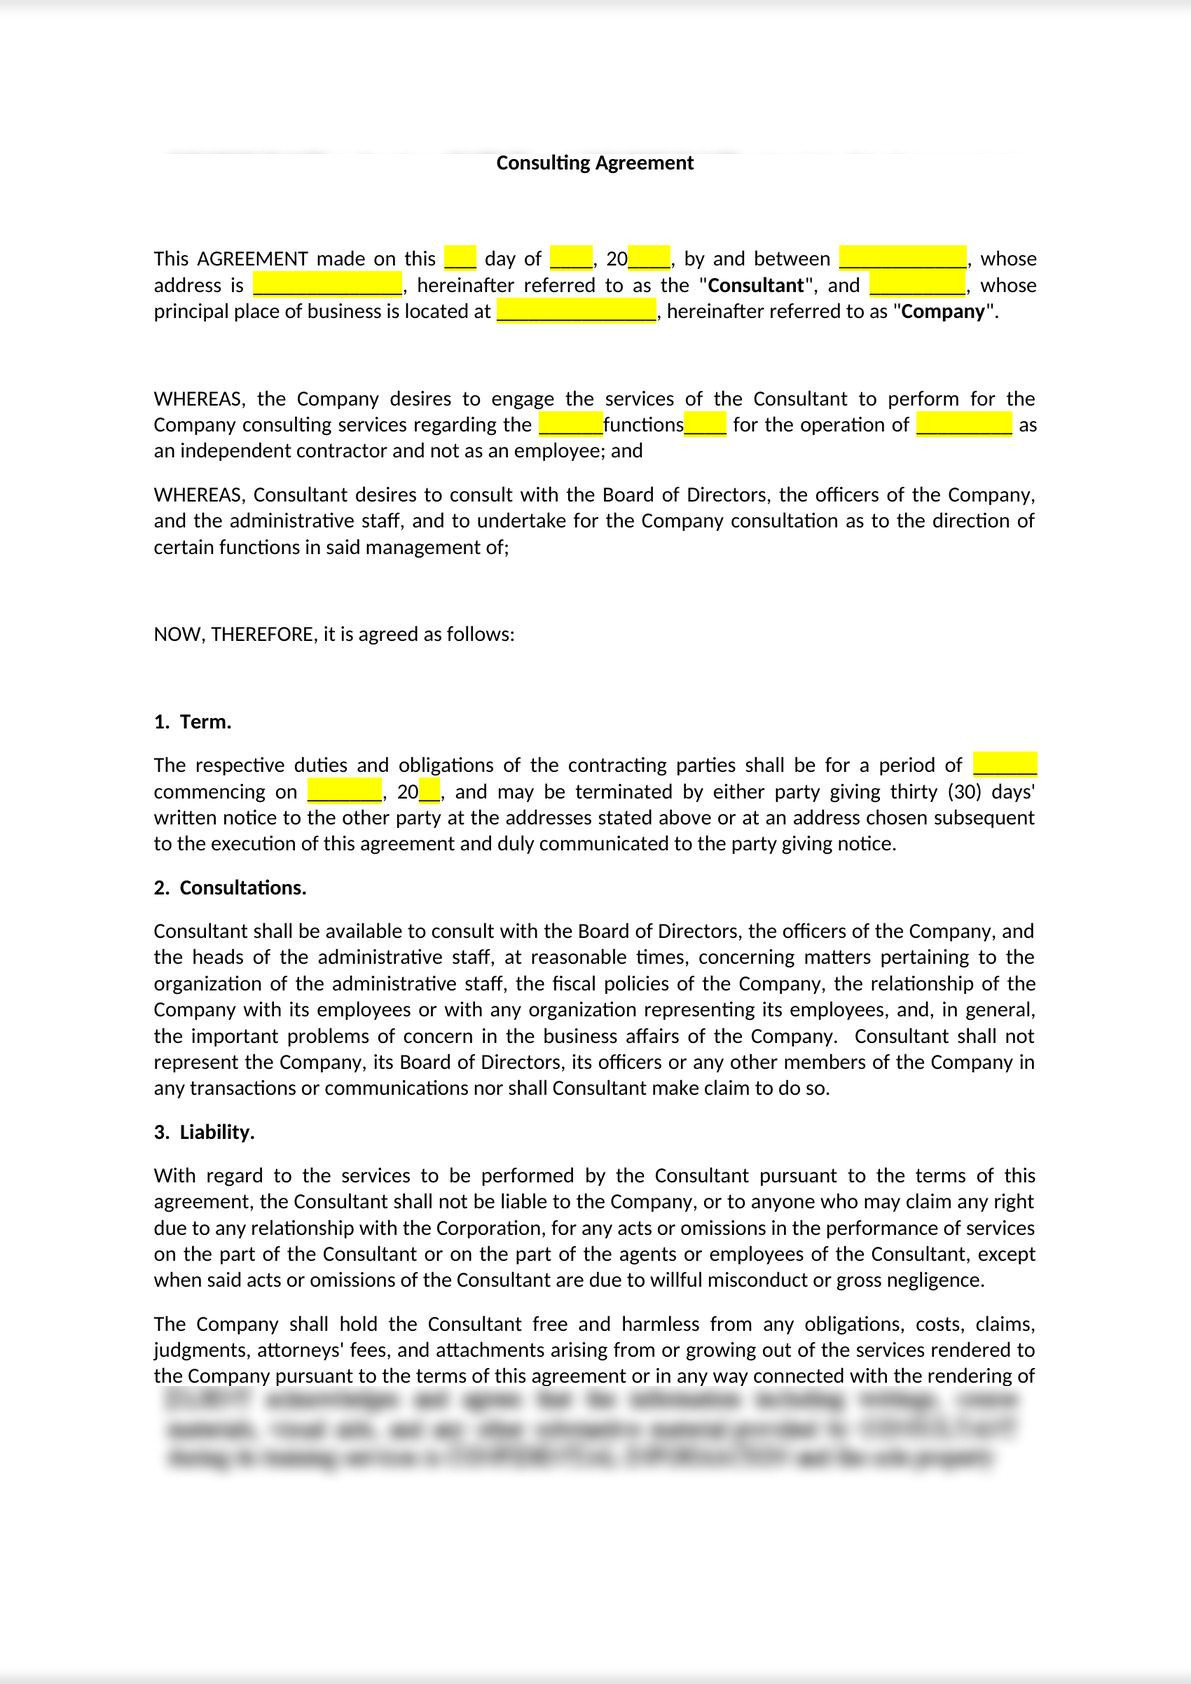 Consulting agreement-1